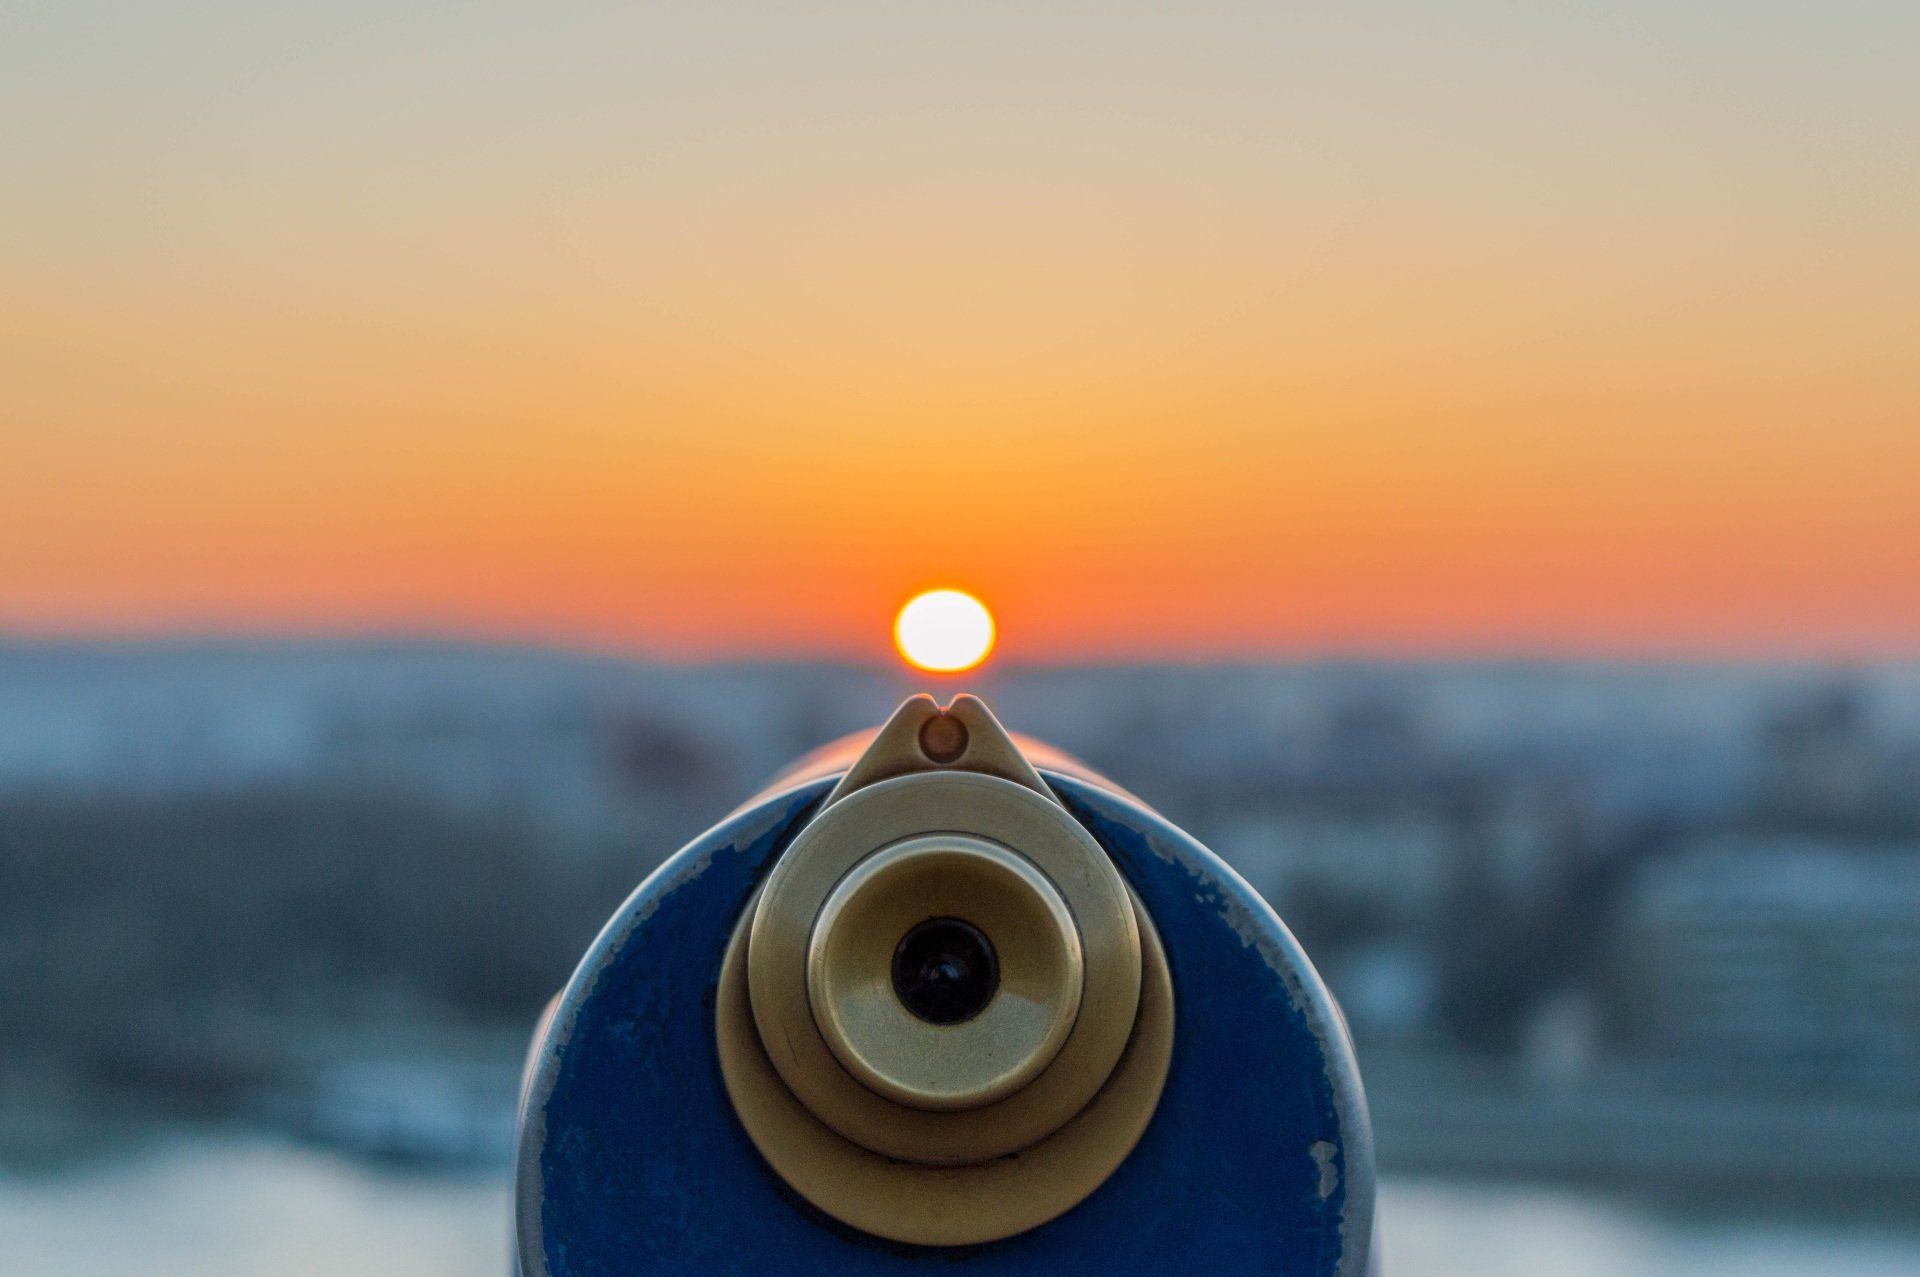 A telescope pointing towards the sunset, reflecting the blog content on the simple power of noticing